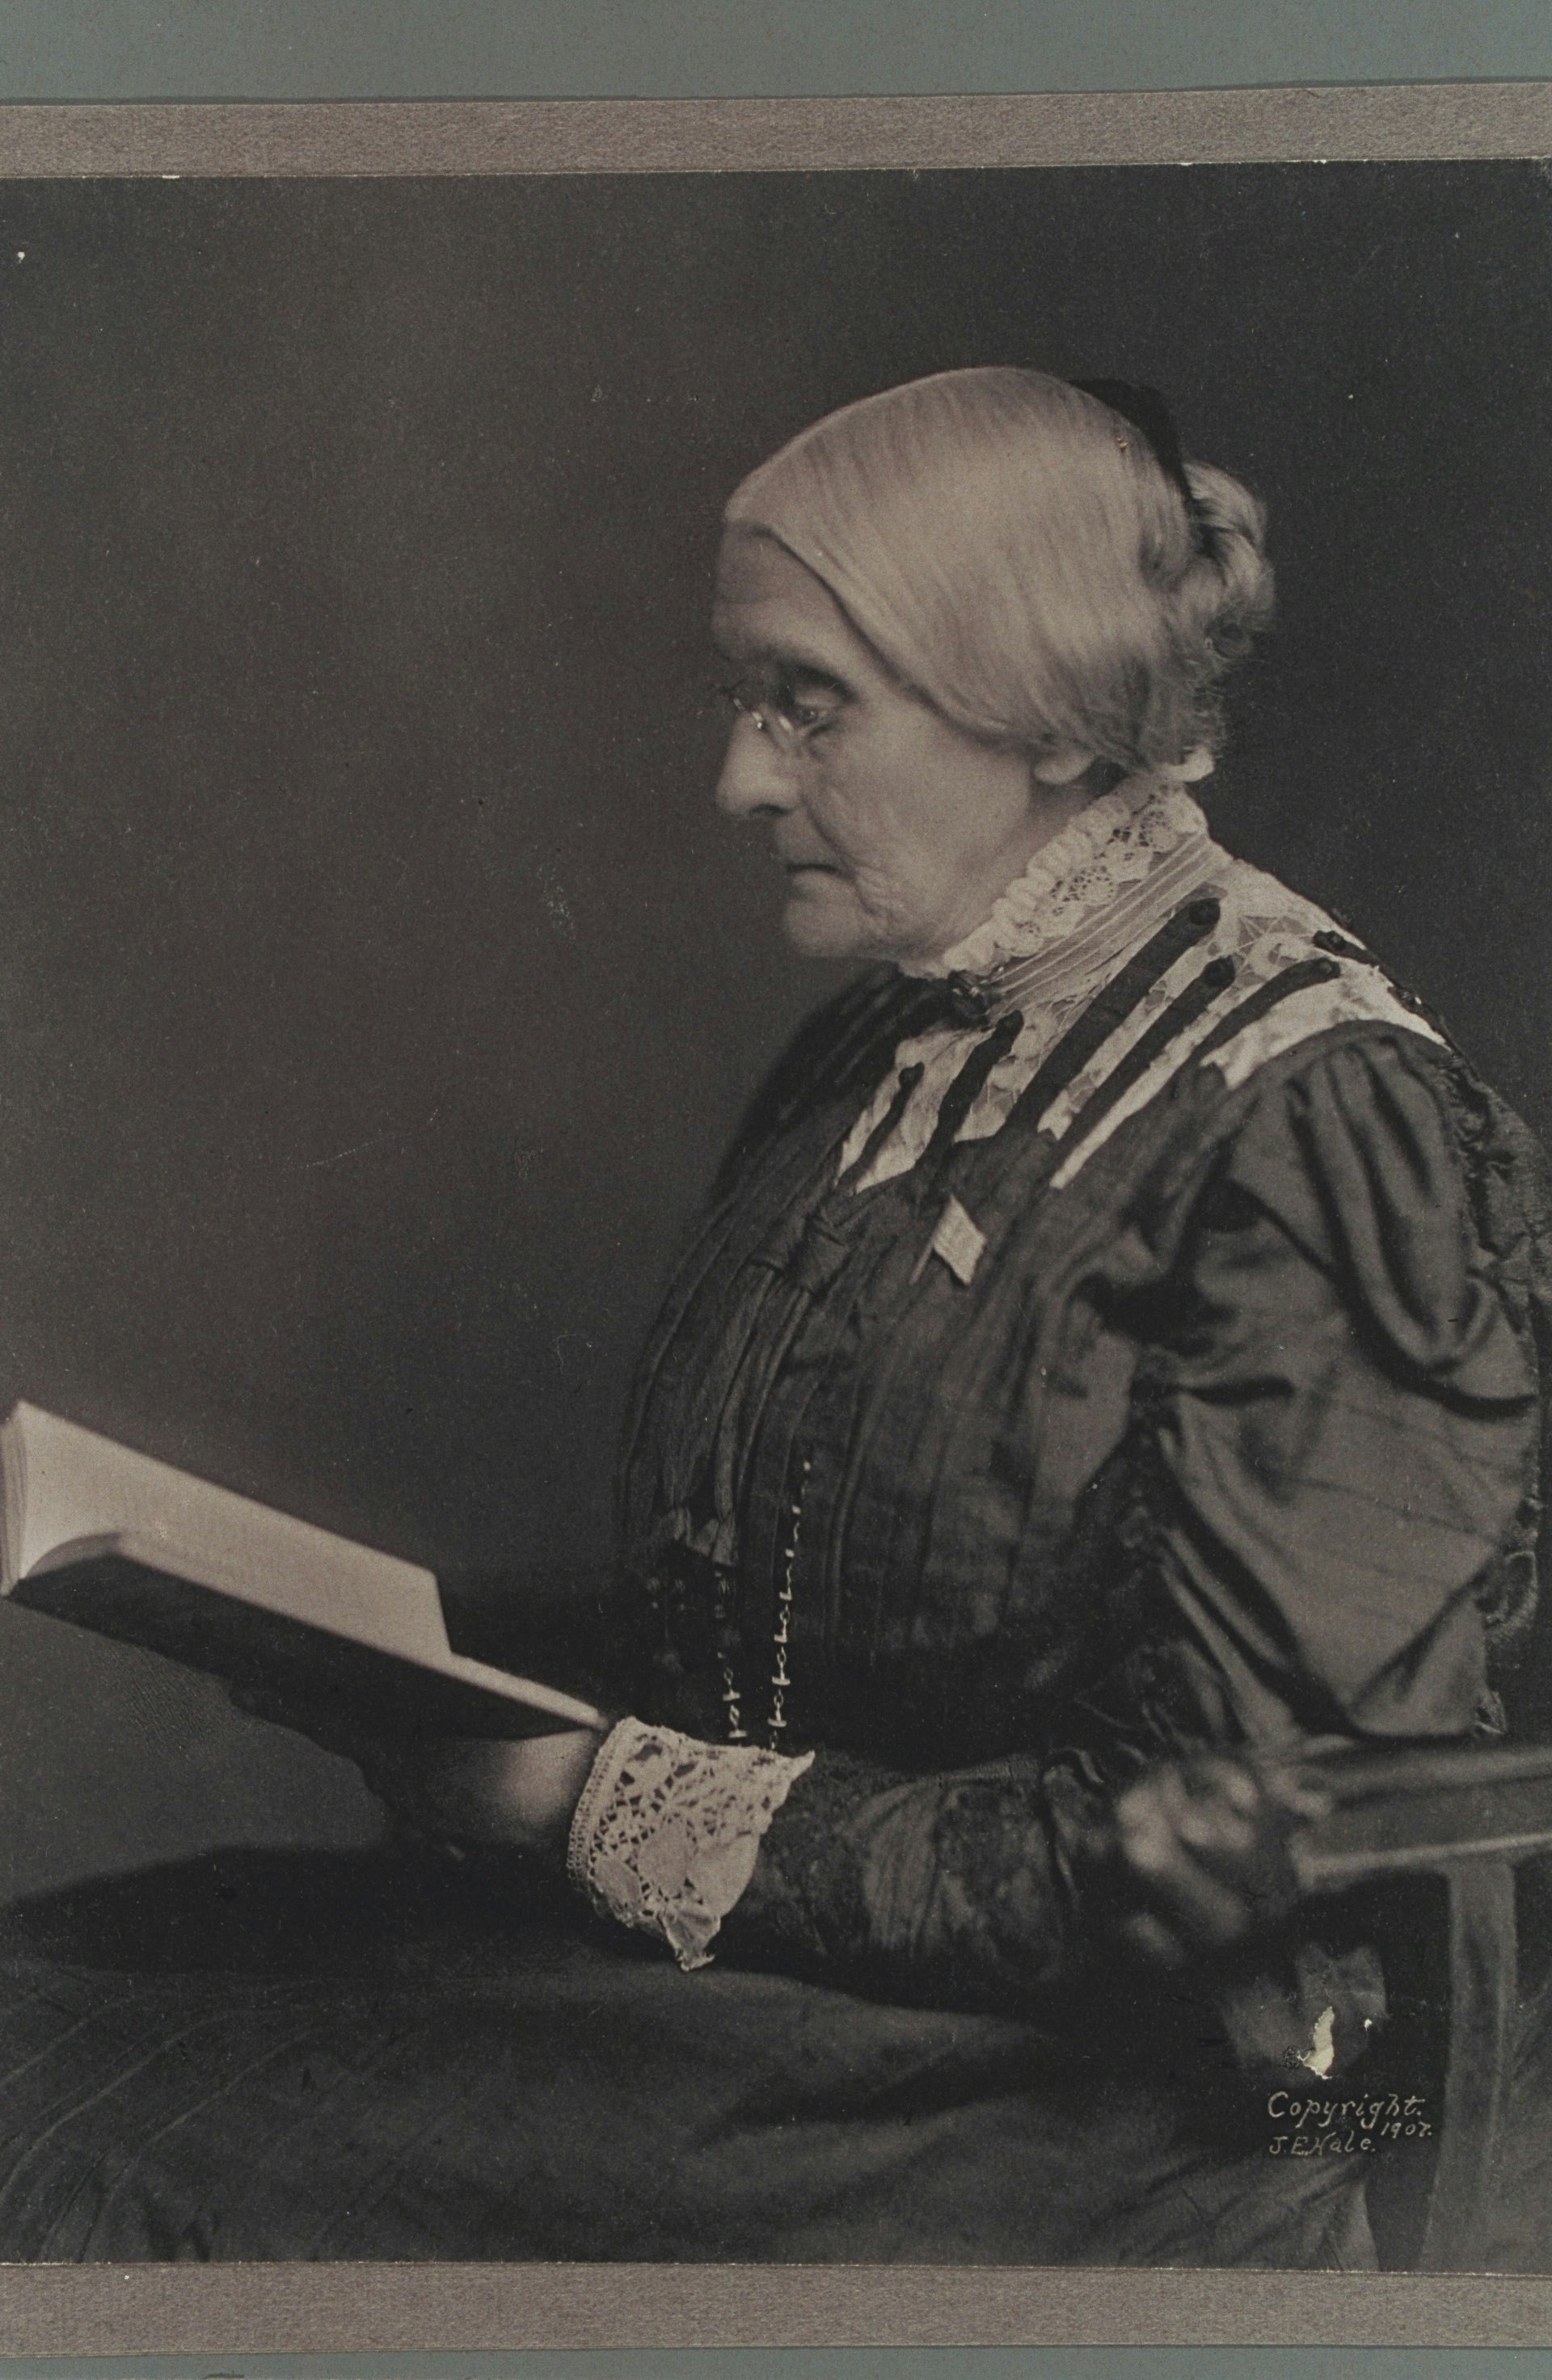 Susan B. Anthony seated, and reading a book